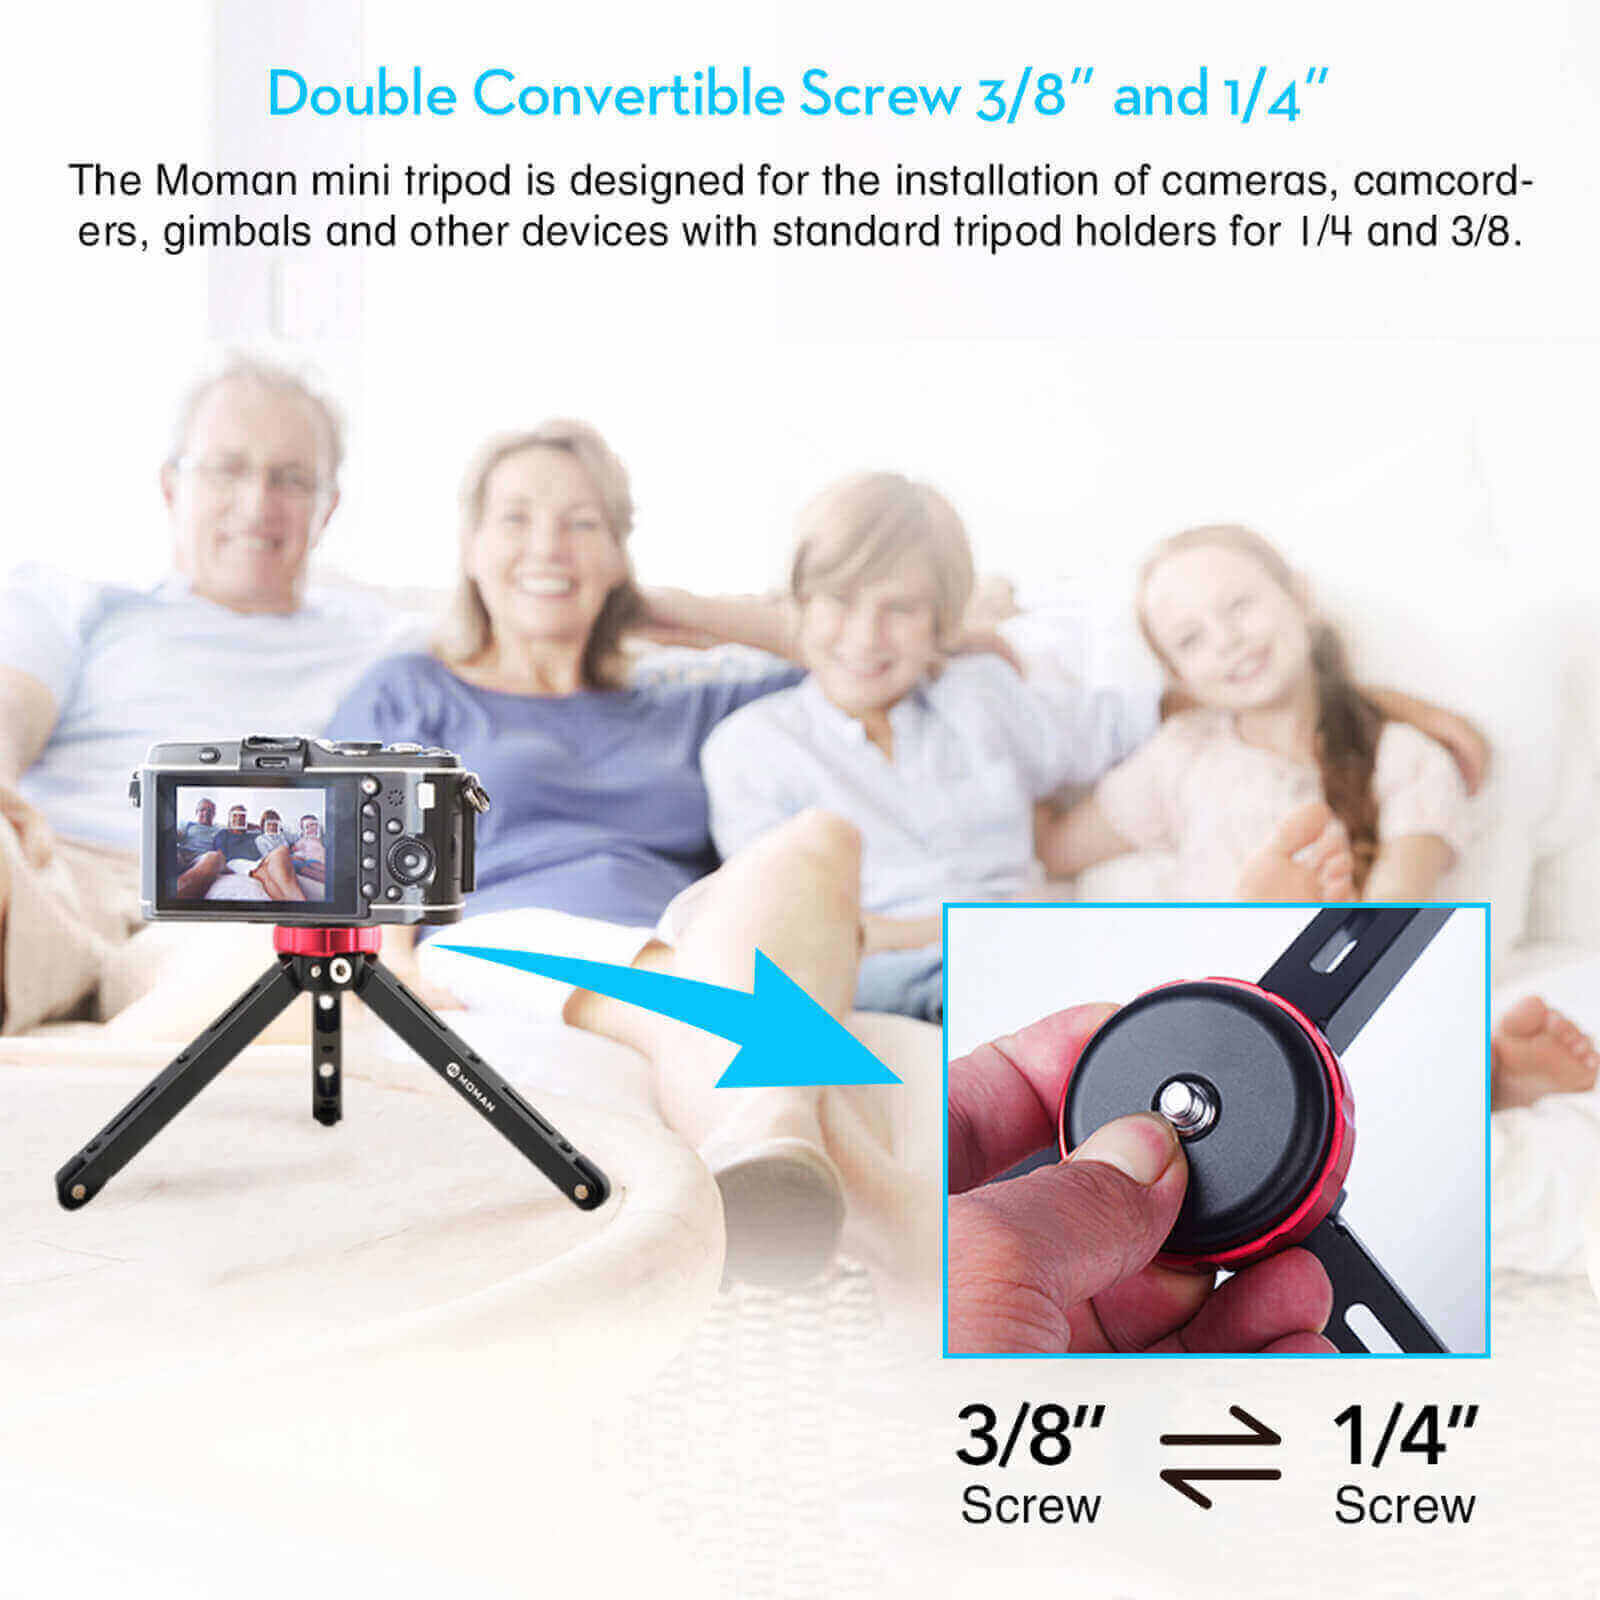 Moman TR1 tabletop tripod for phone has double convertible screw 3/8